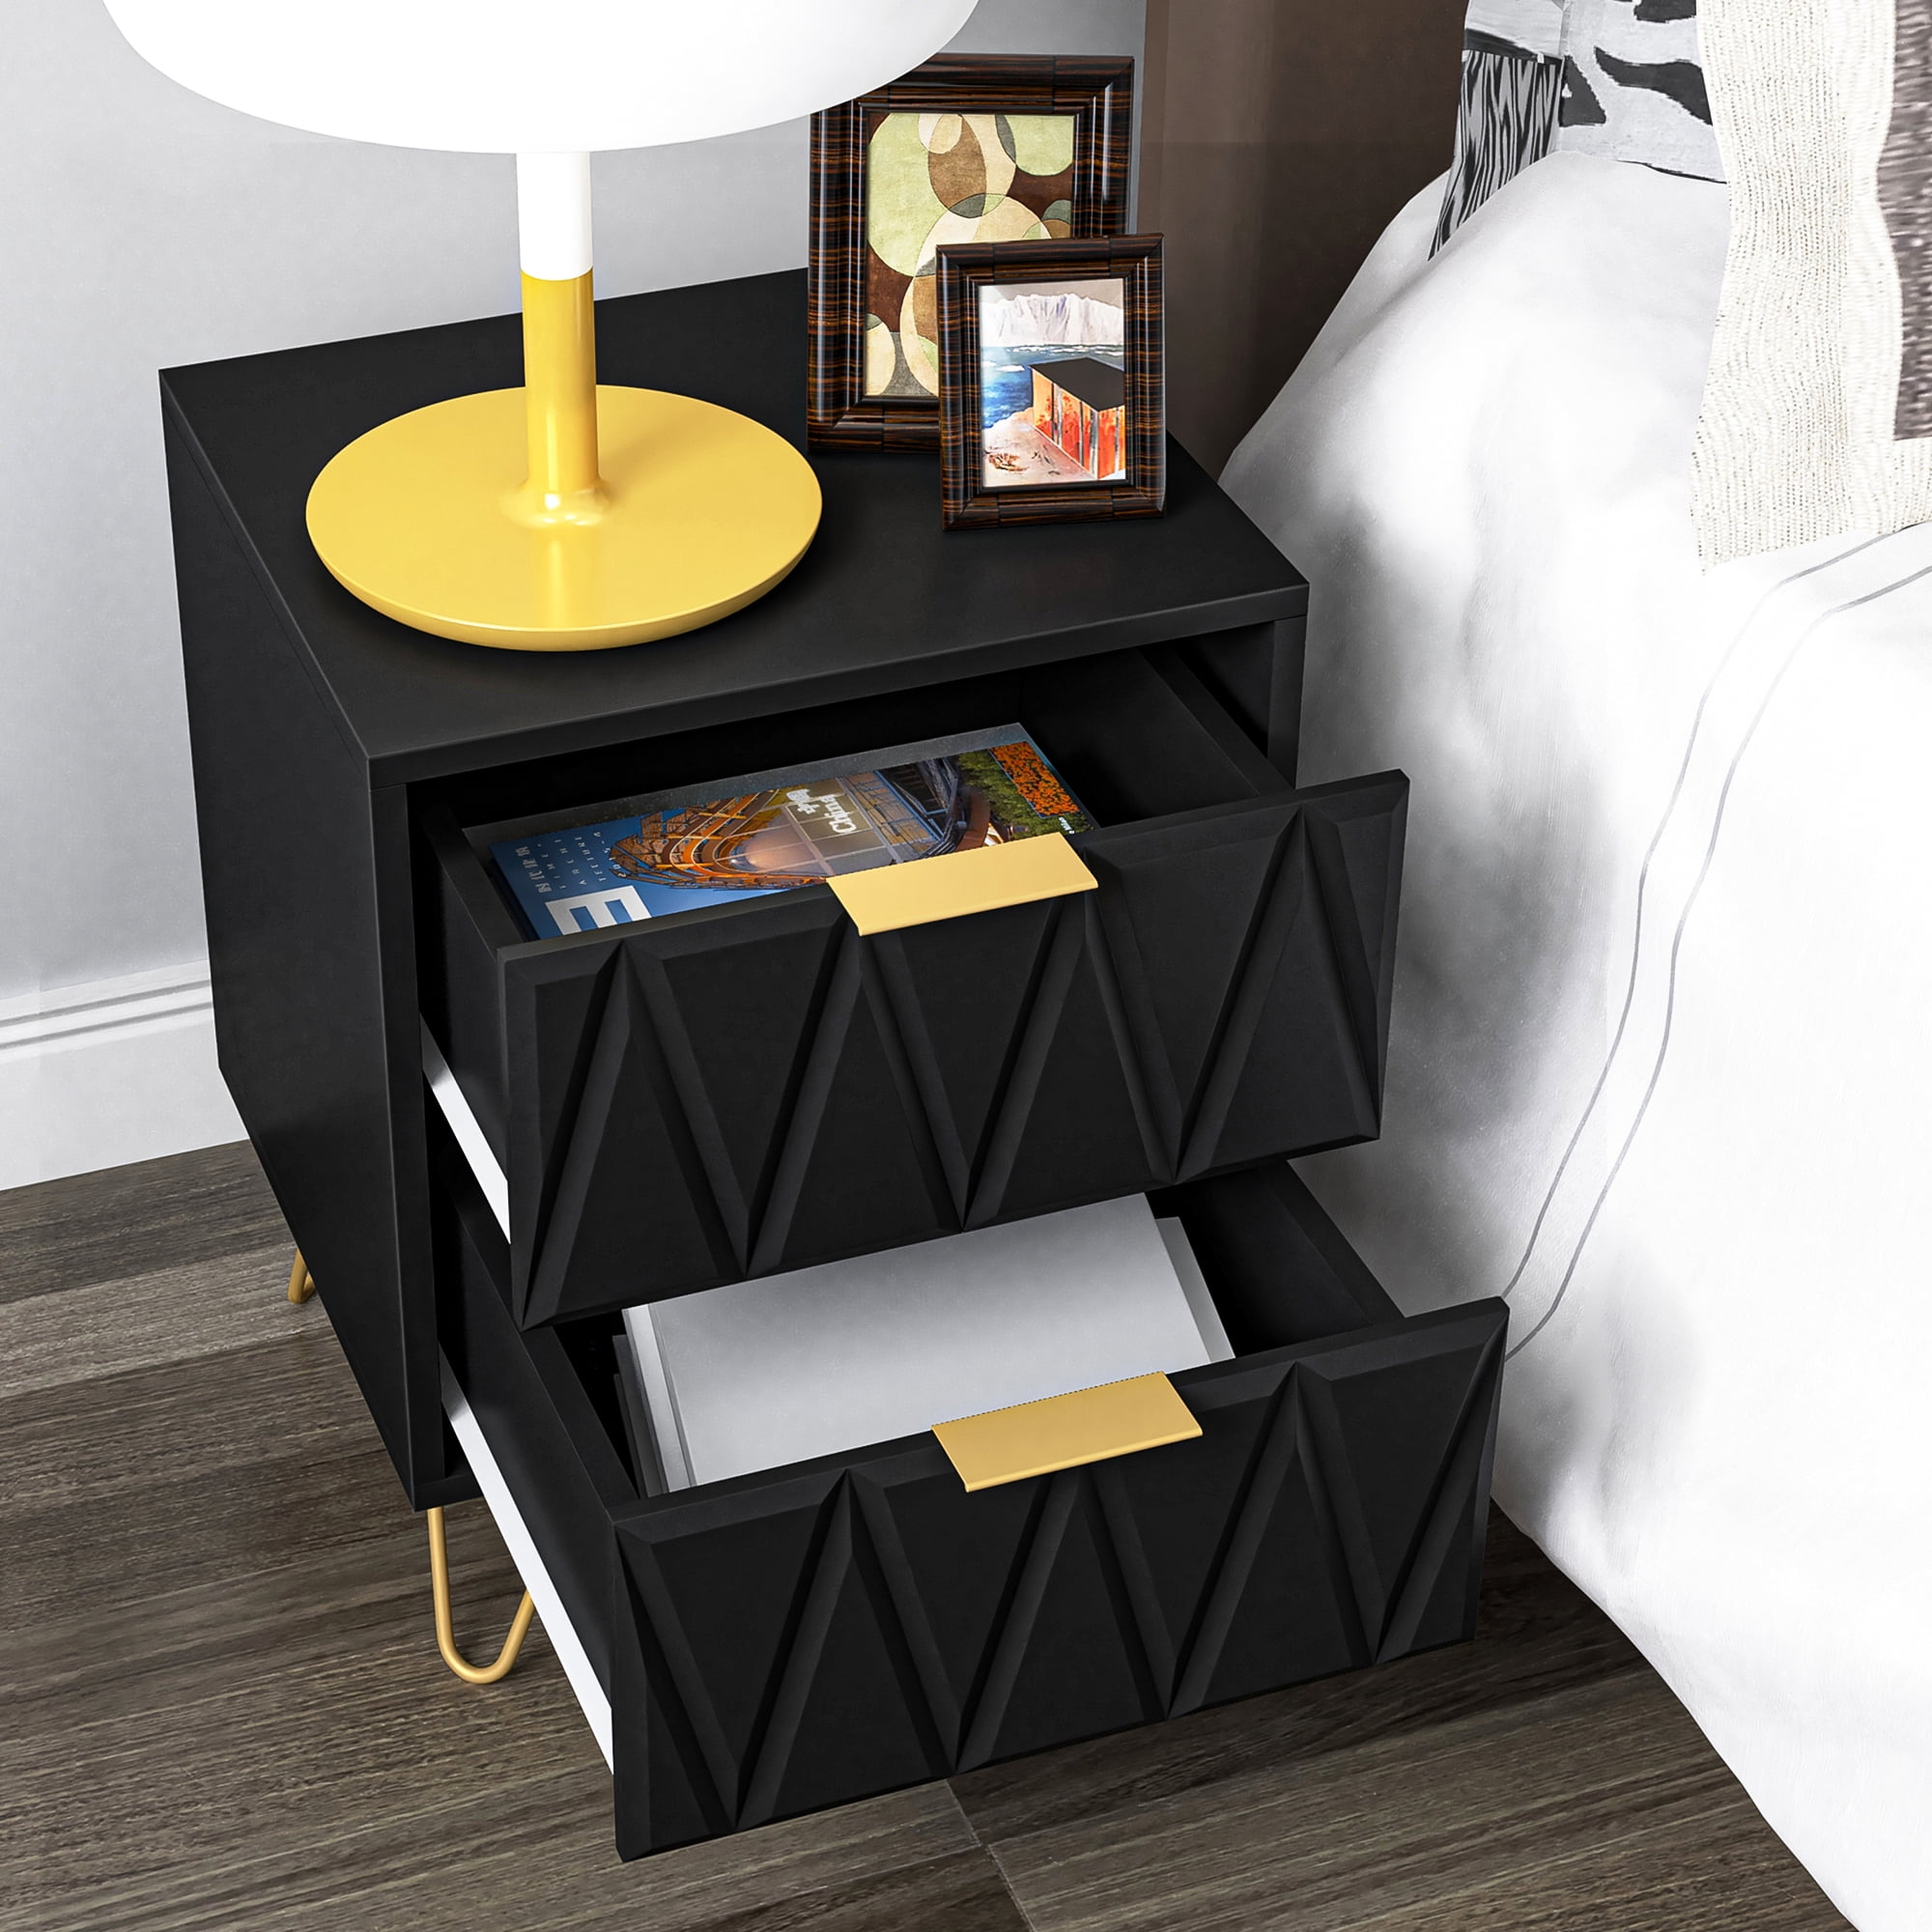 Hommoo End Table, Square Side Table Modern Night Stand with 2-Tier